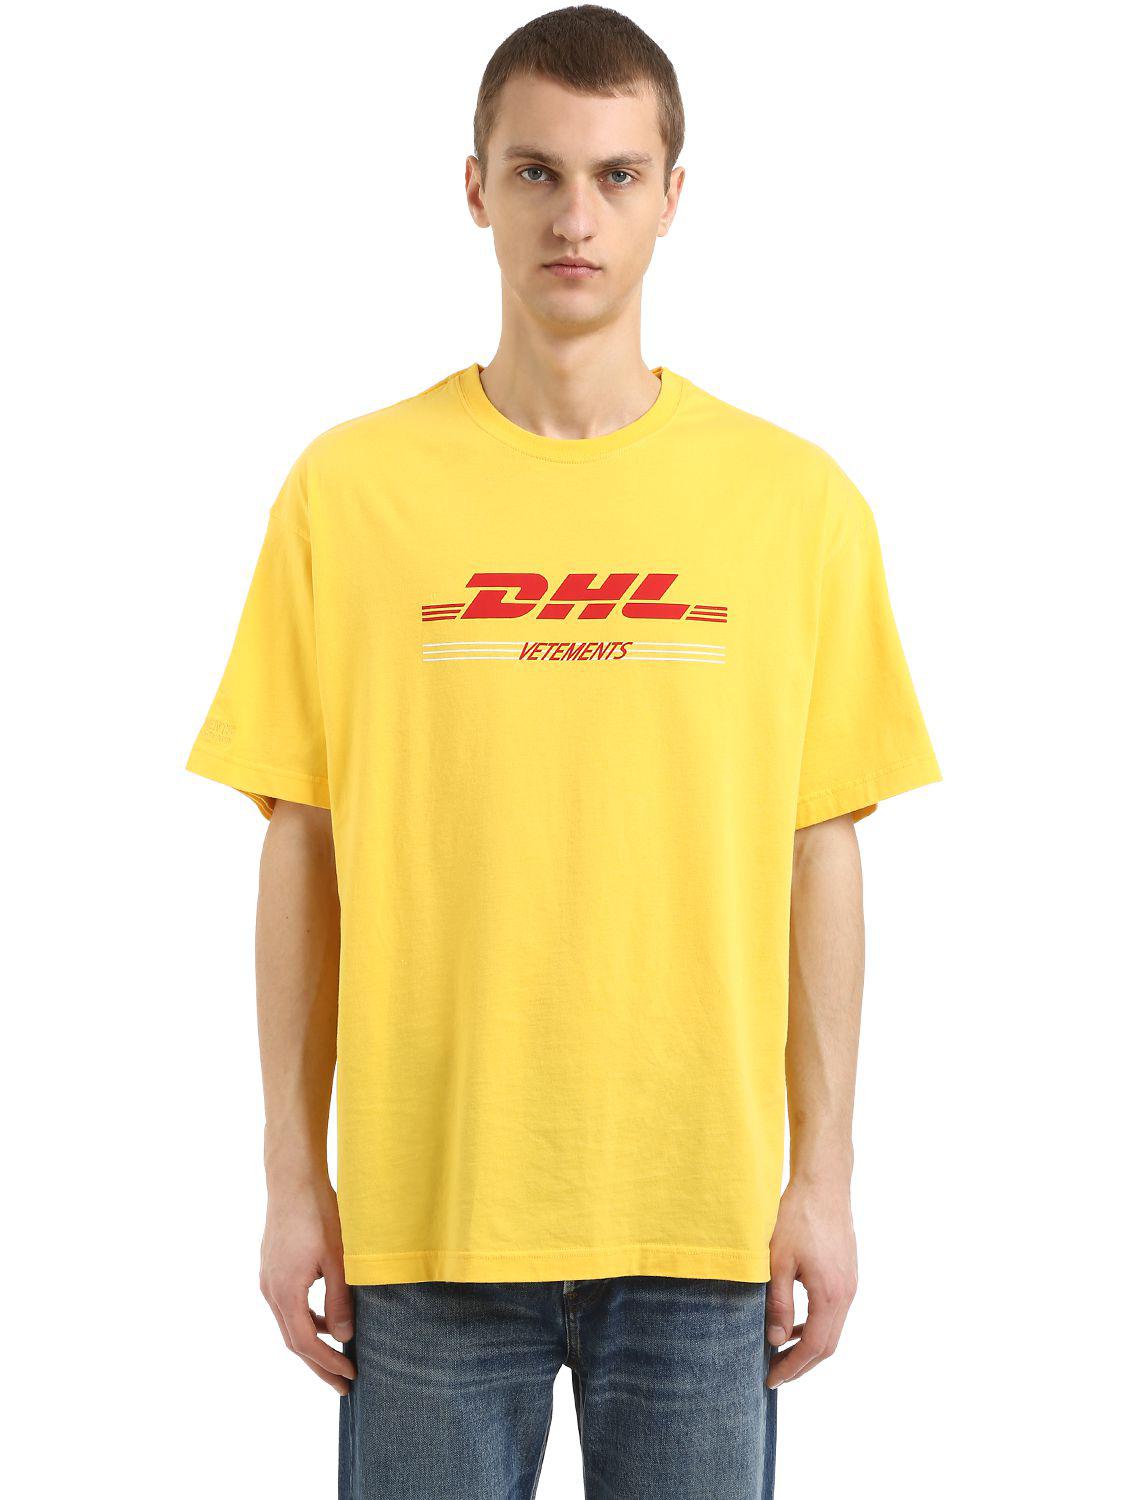 Vetements Dhl Cotton Jersey Double T-shirt in Yellow for Men - Lyst